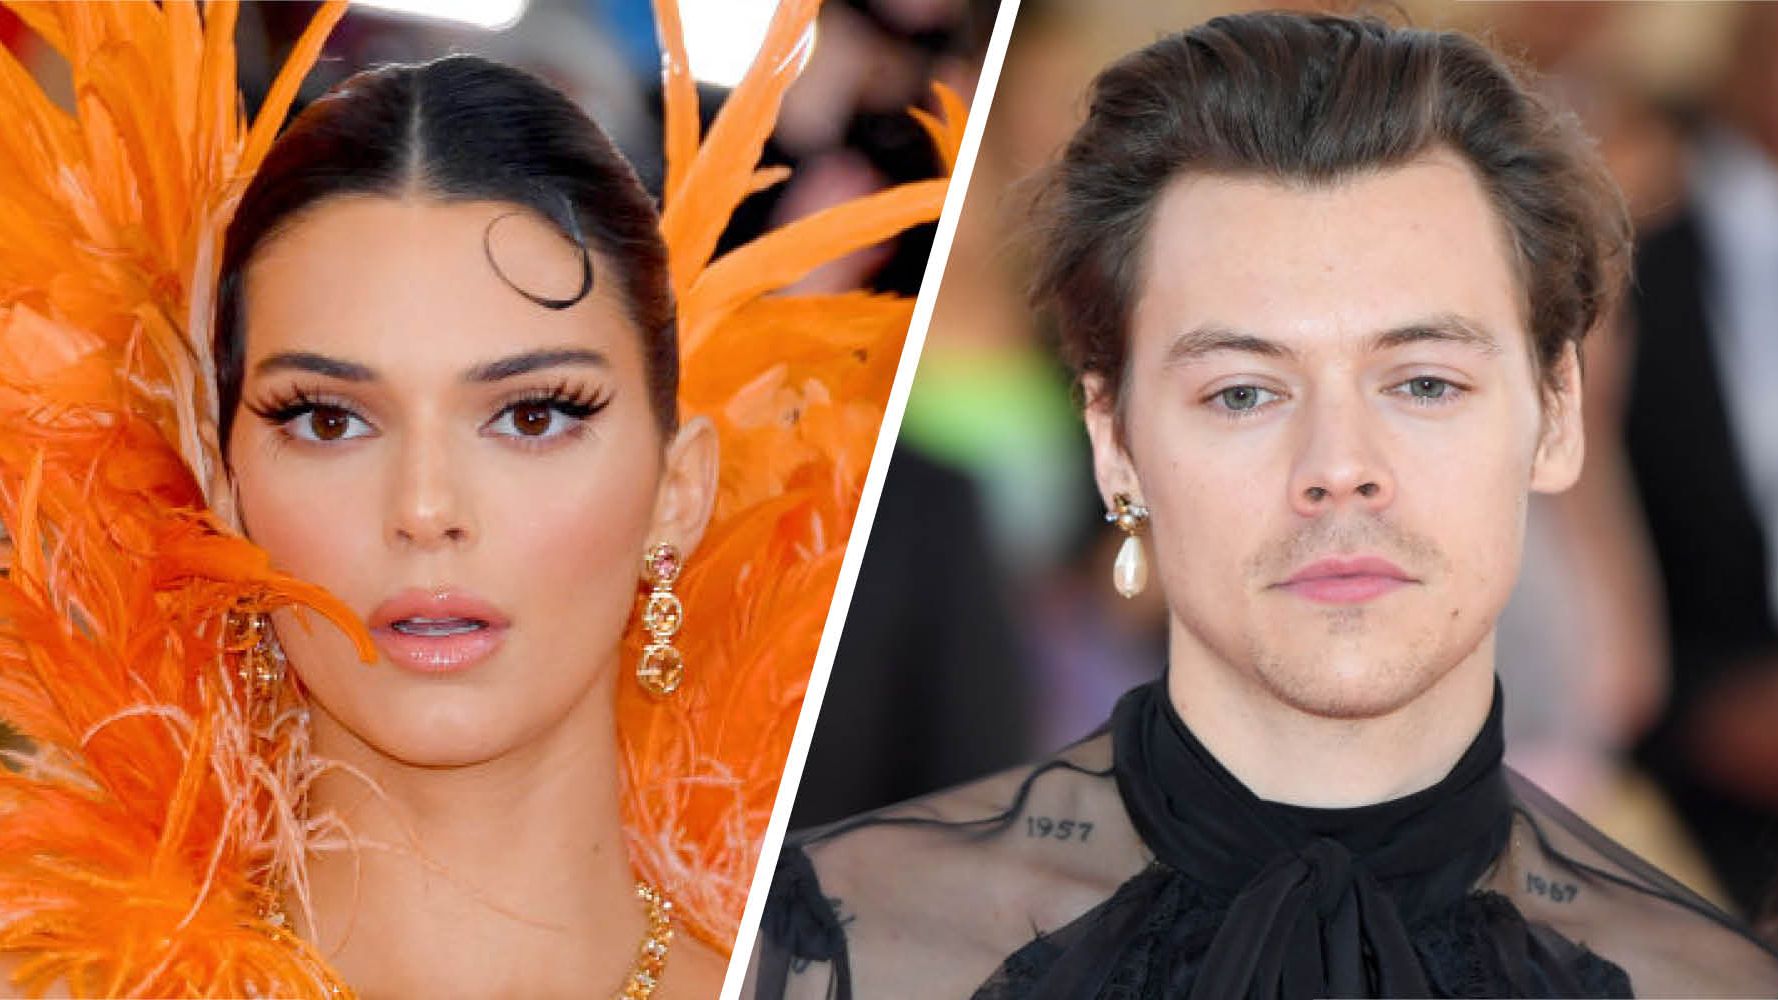 One Direction Harry Styles and Kendall Jenner spotted leaving New